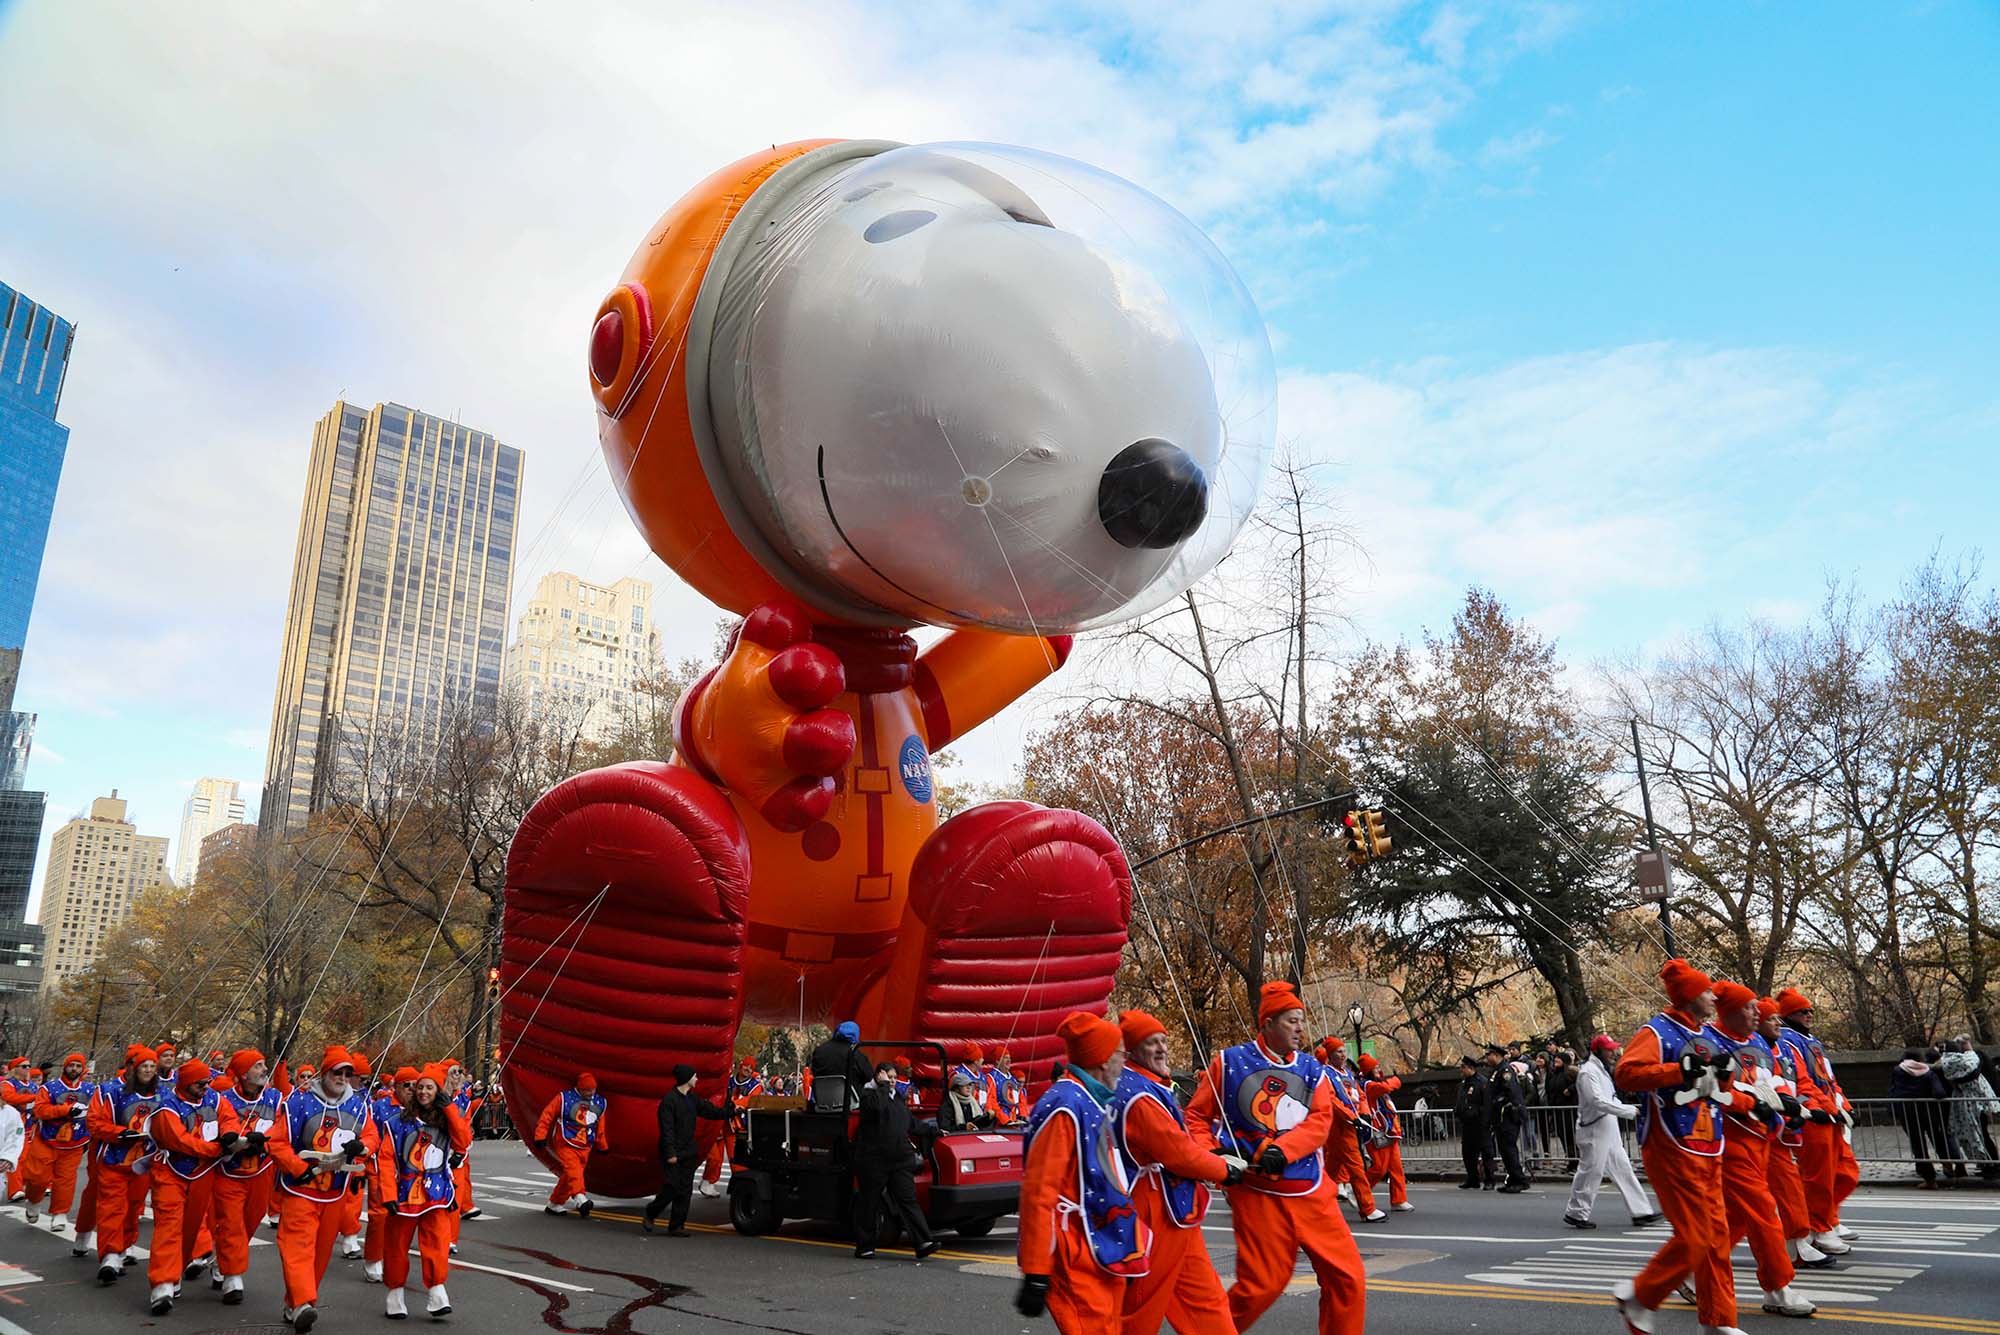 Photo: A large Snoopy Astronaut balloon debuts at the Macy's Thanksgiving Day Parade. A giant Snoopy dog balloon held by a crowd of people in orange outfits below it, makes it way down the street.